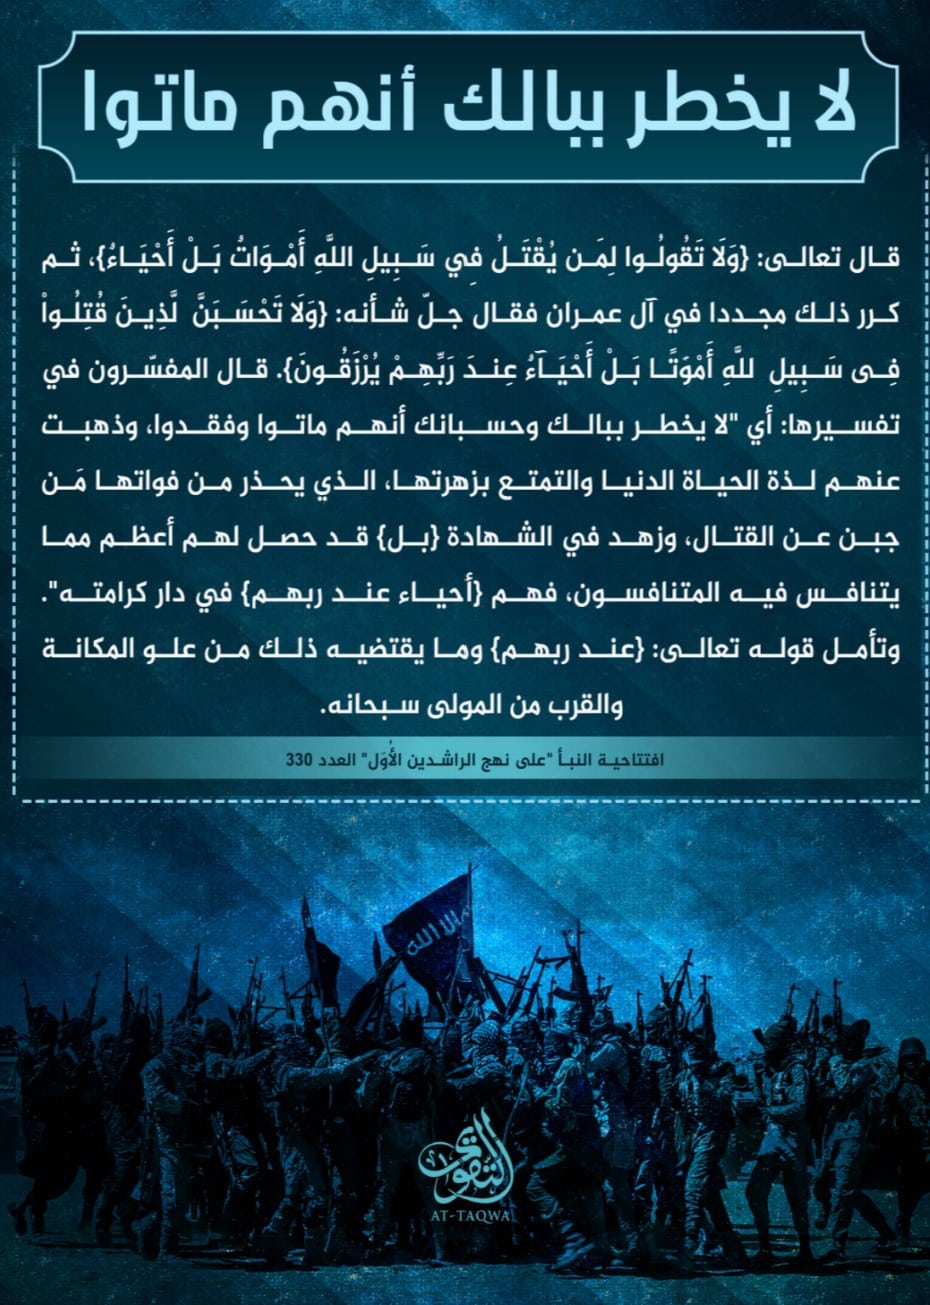 Poster) al-Taqwa Media (Unofficial Islamic State): "And You Wouldn't Think They Died"